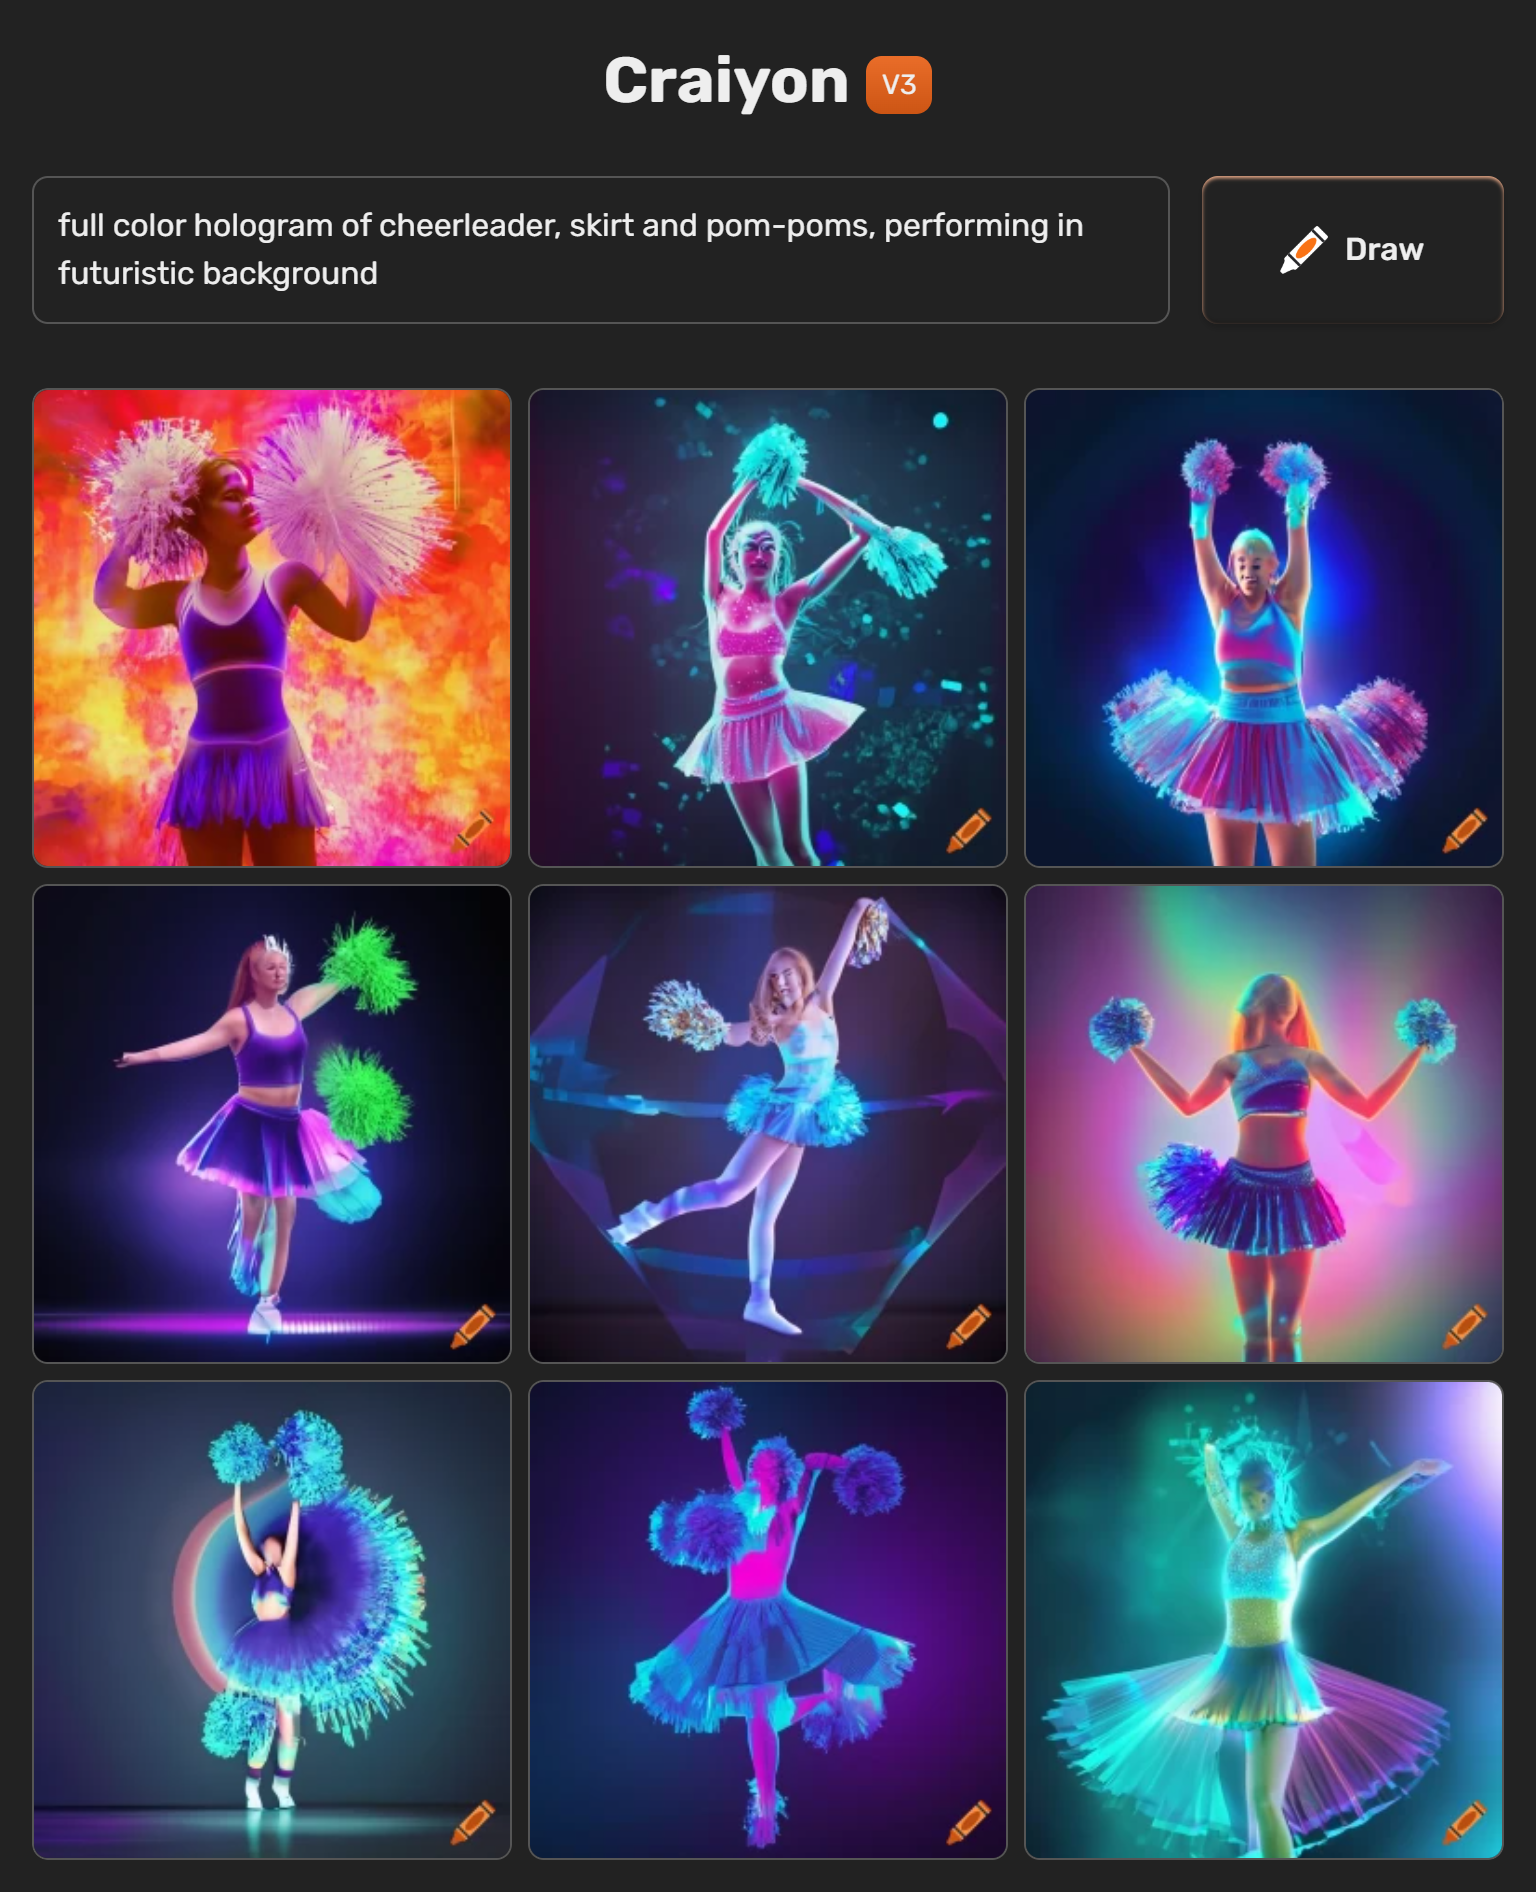 craiyon_192658_full_color_hologram_of_cheerleader__skirt_and_pom_poms__performing_in_futuristic_background.png